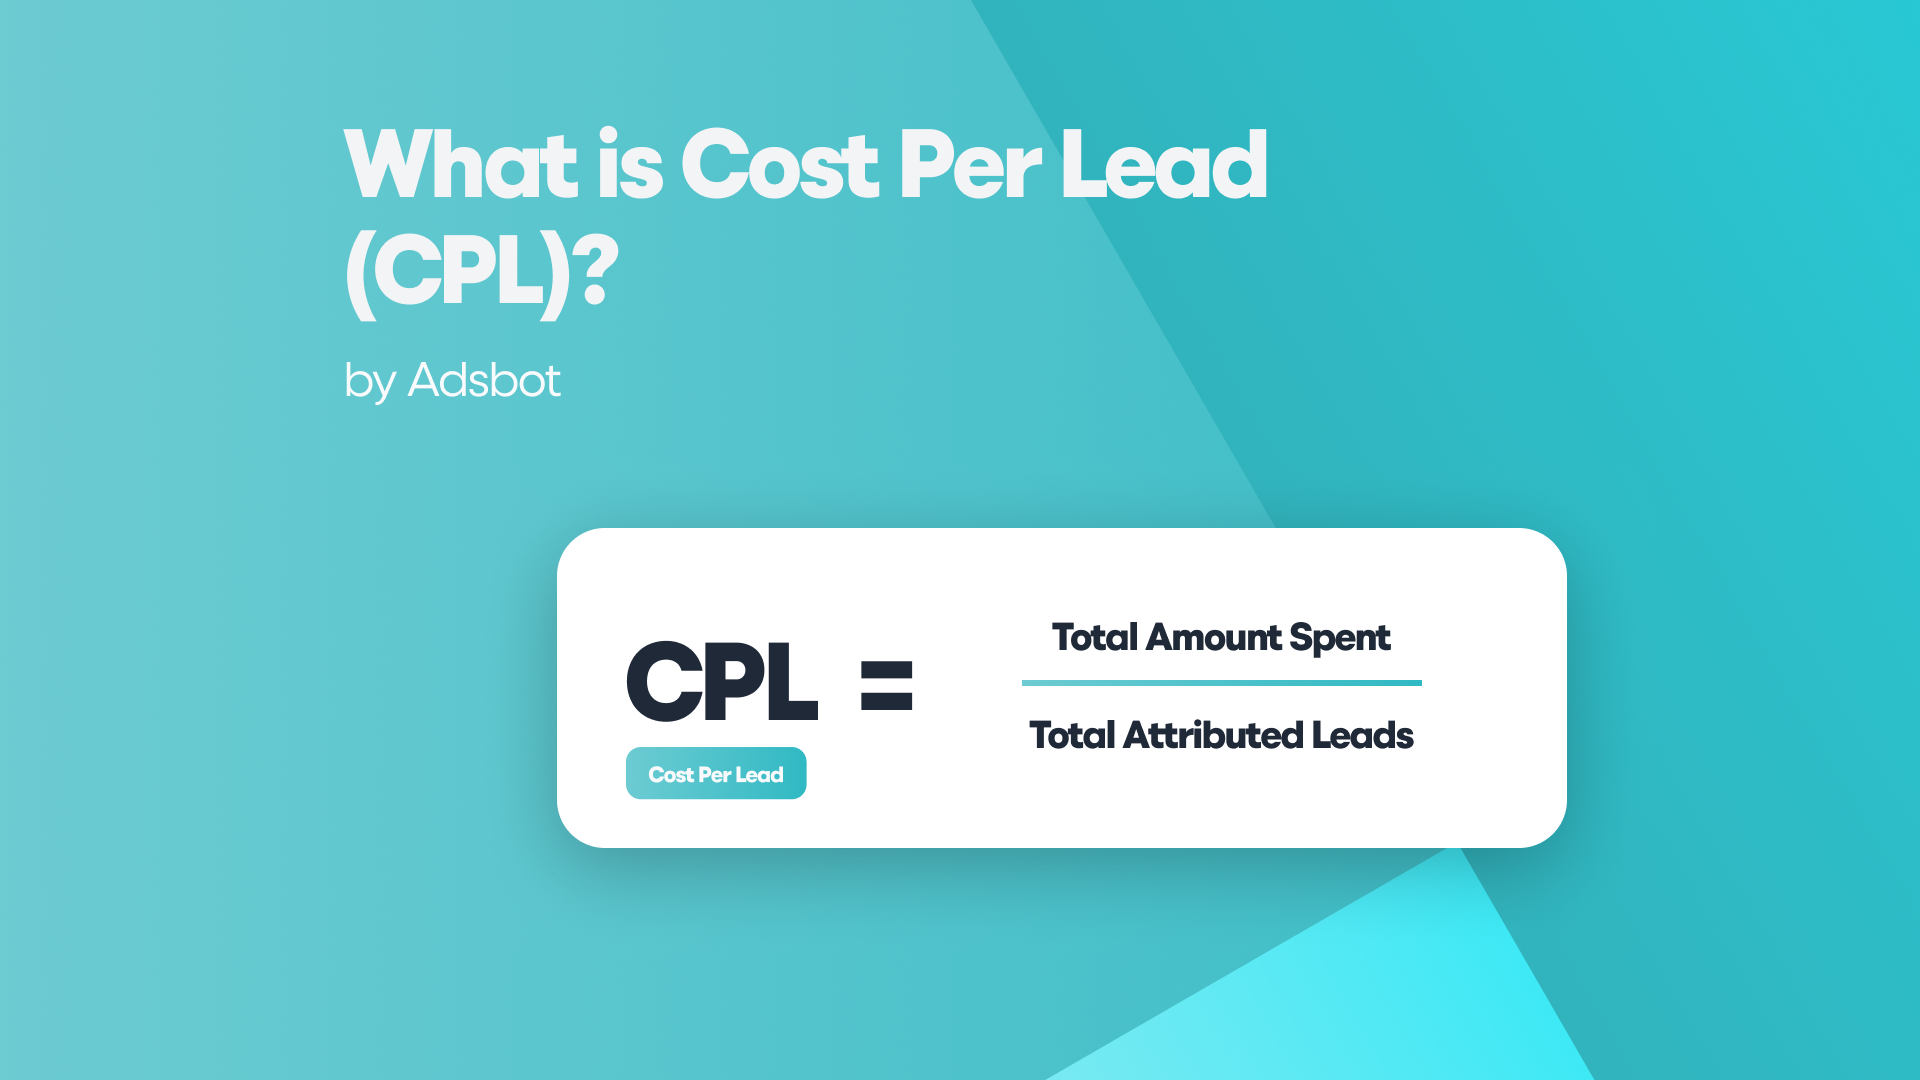 What is Cost Per Lead?